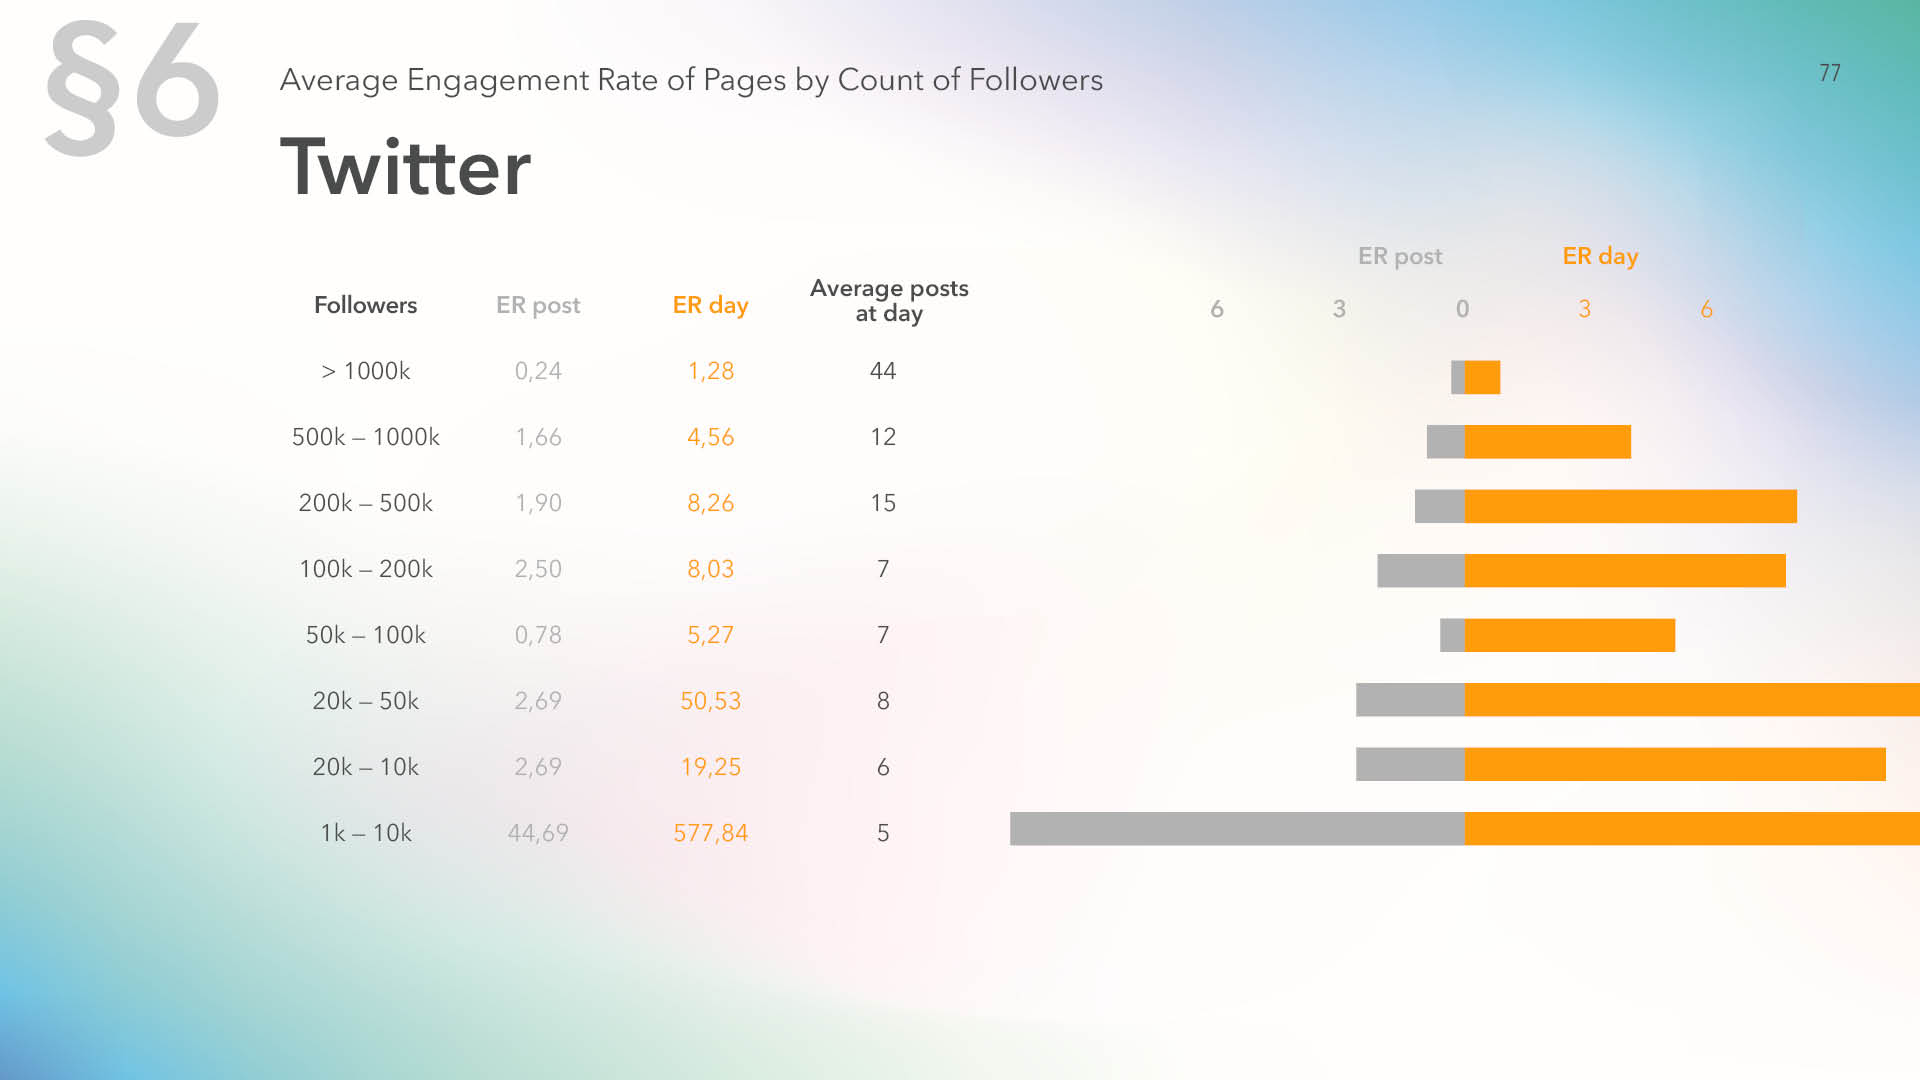 Average engagement rate of Twitter pages by count of followers, 2019